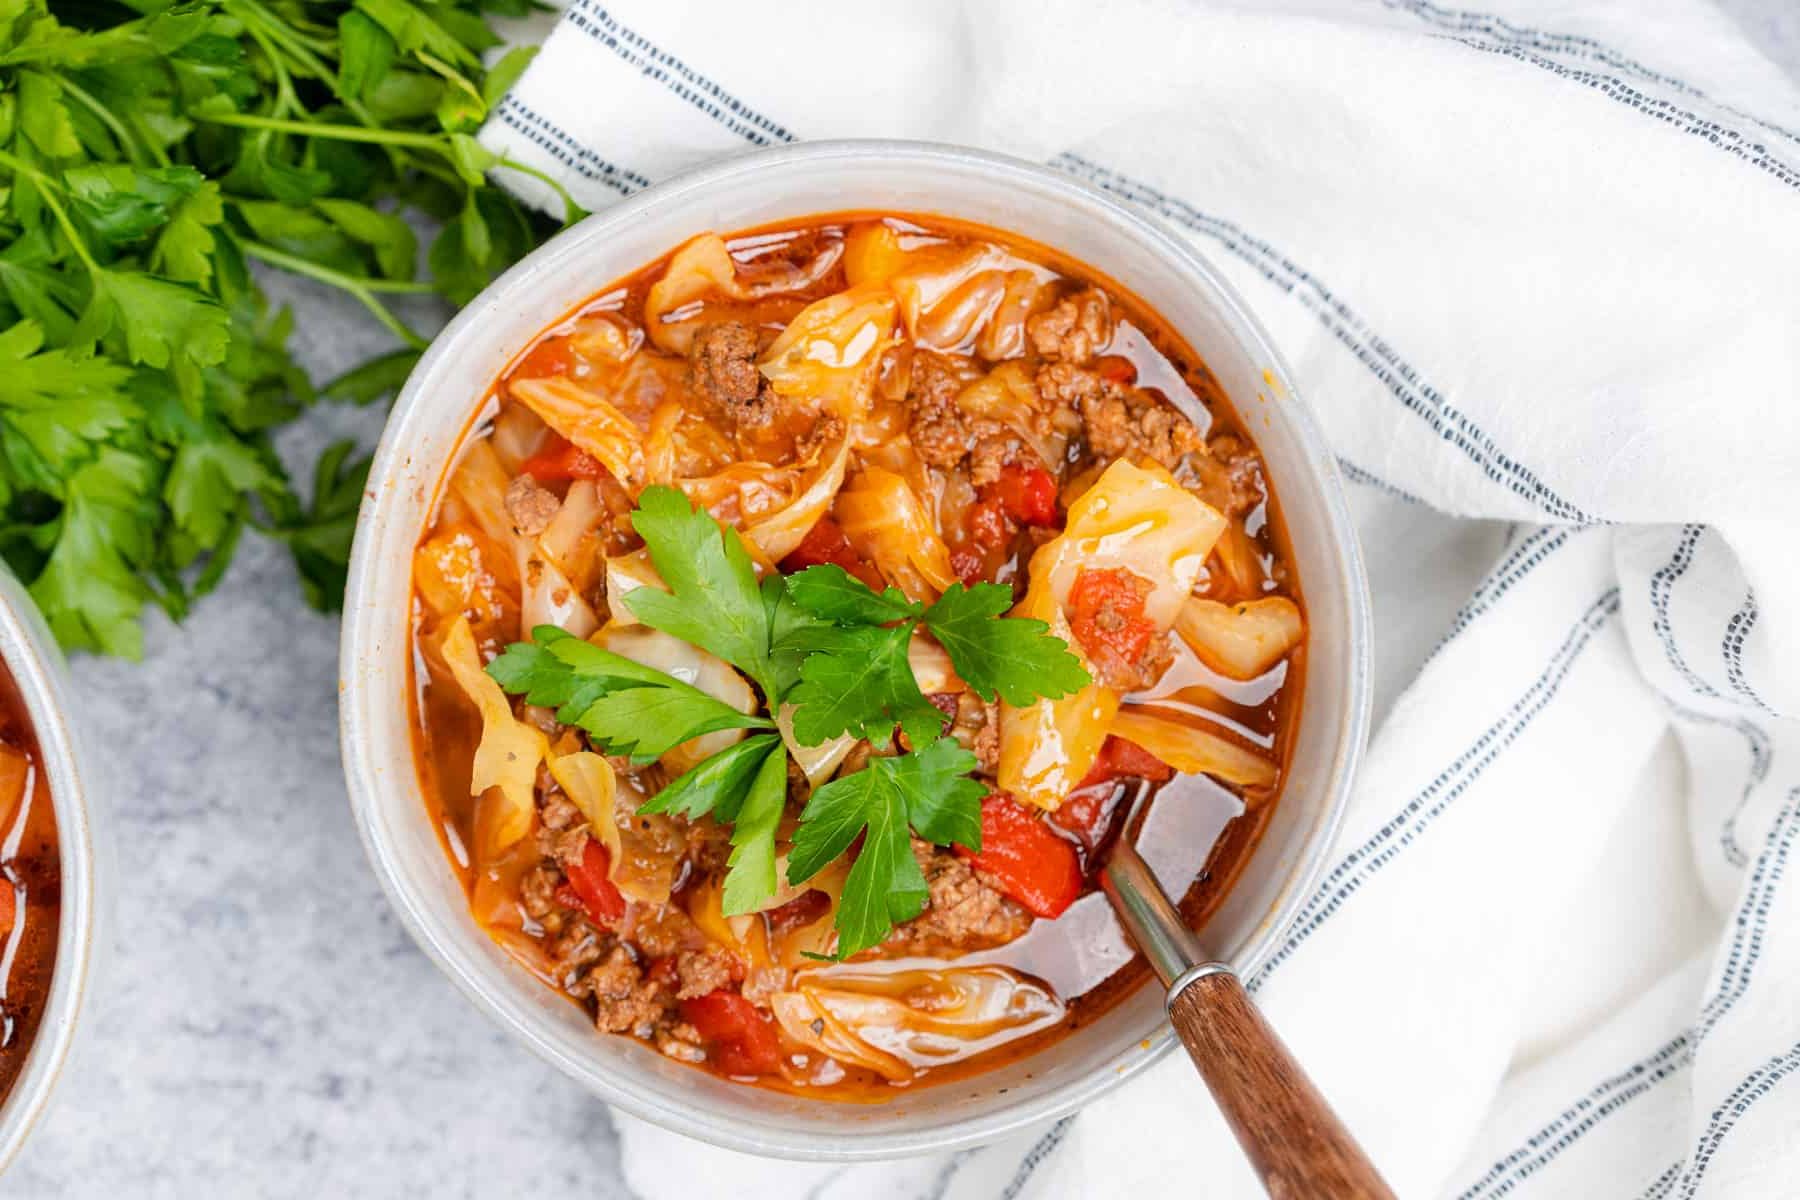 Cabbage Roll Soup Recipe Details